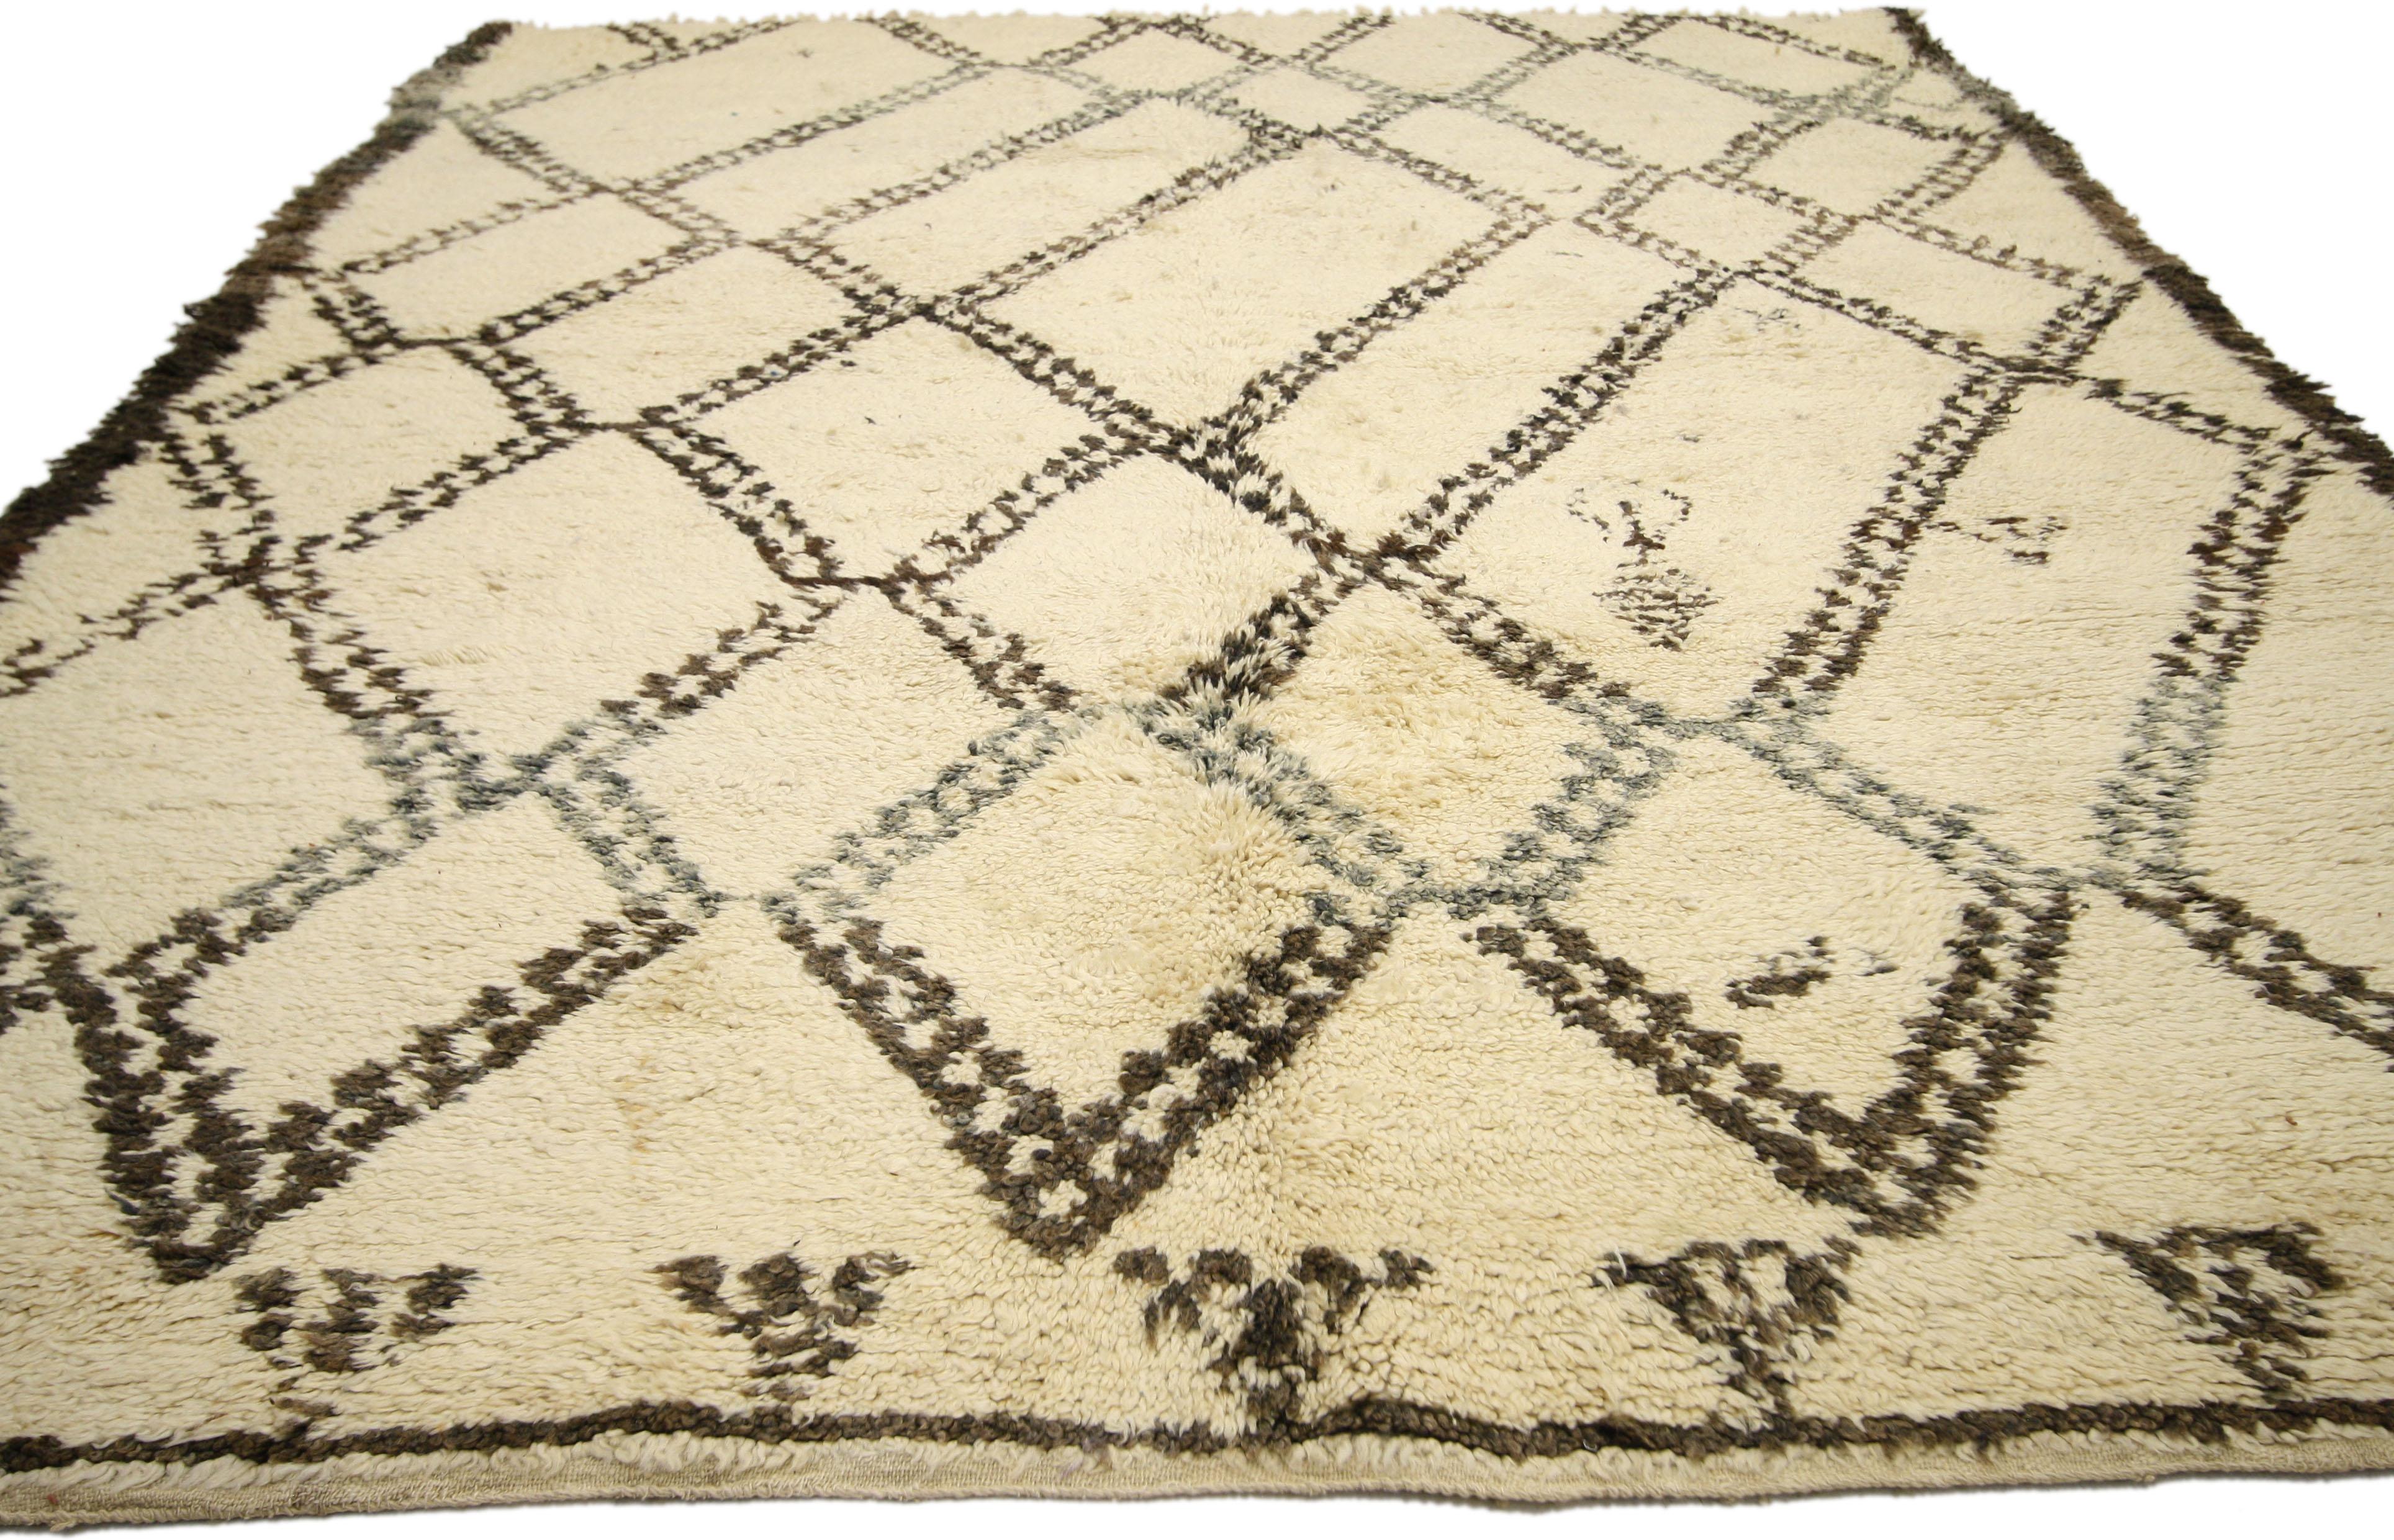 Hand-Knotted Vintage Beni Ourain Moroccan Rug in Traditional Village Style